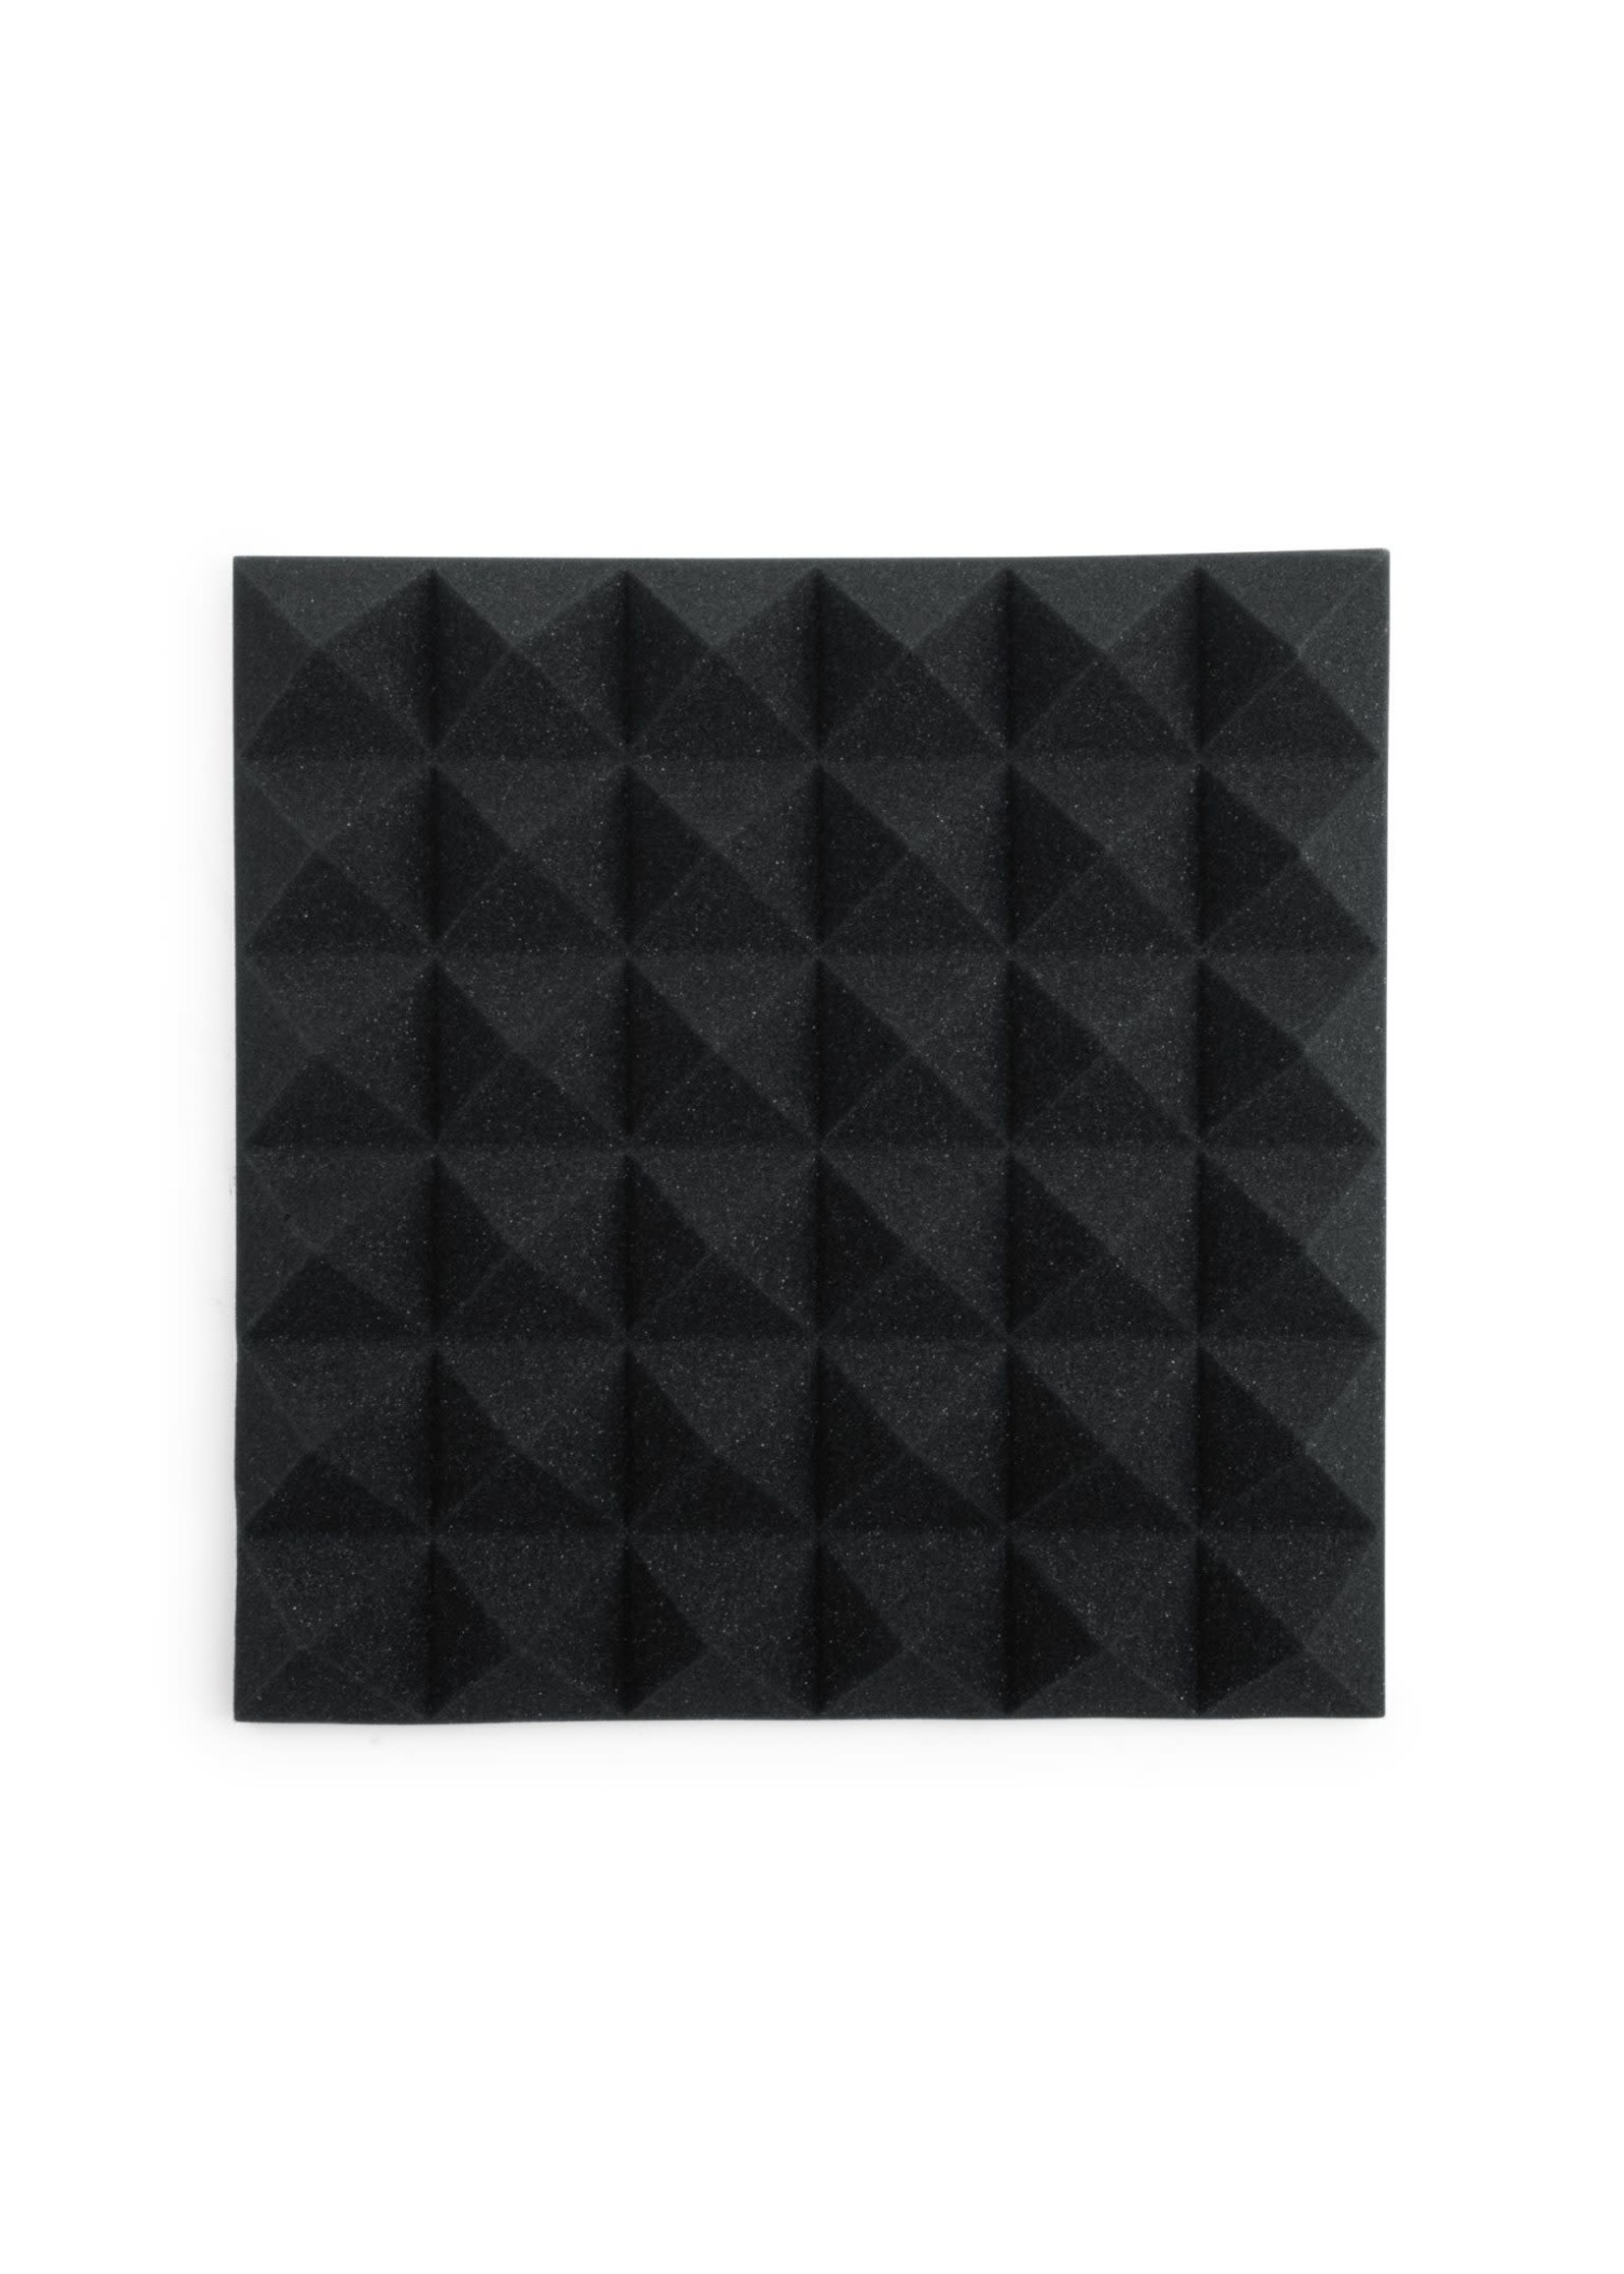 Gator Gator Frameworks Eight (8) Pack of 2” Thick Acoustic Foam Pyramid Panels 12”x12”, Charcoal